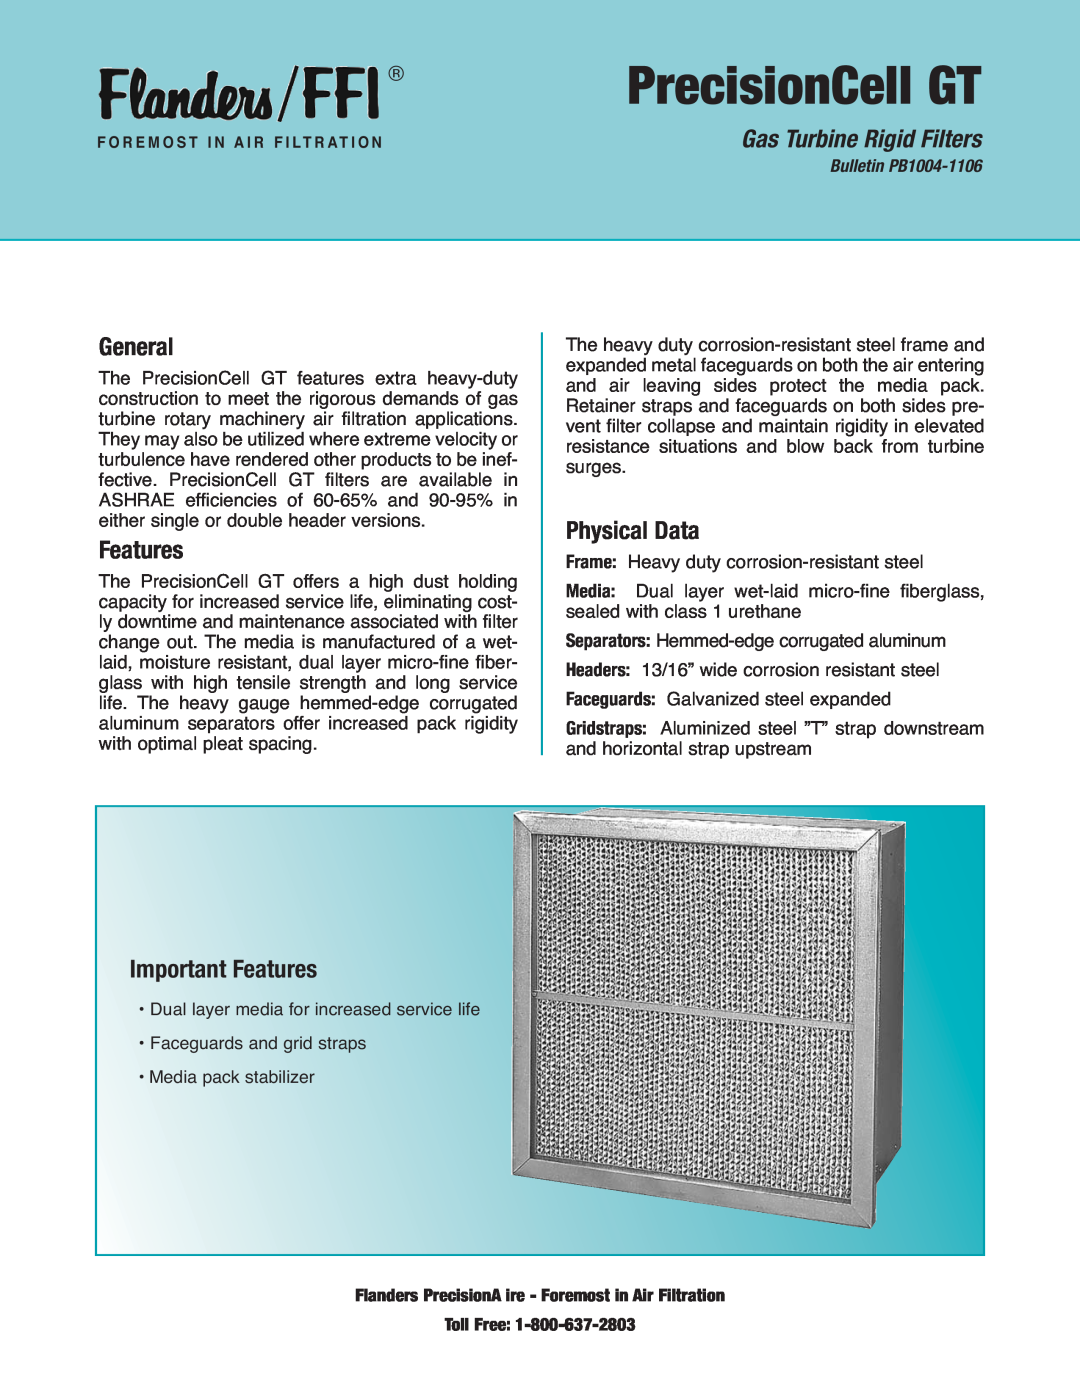 Precisionaire manual General, Physical Data, Important Features, PrecisionCell GT, Gas Turbine Rigid Filters 